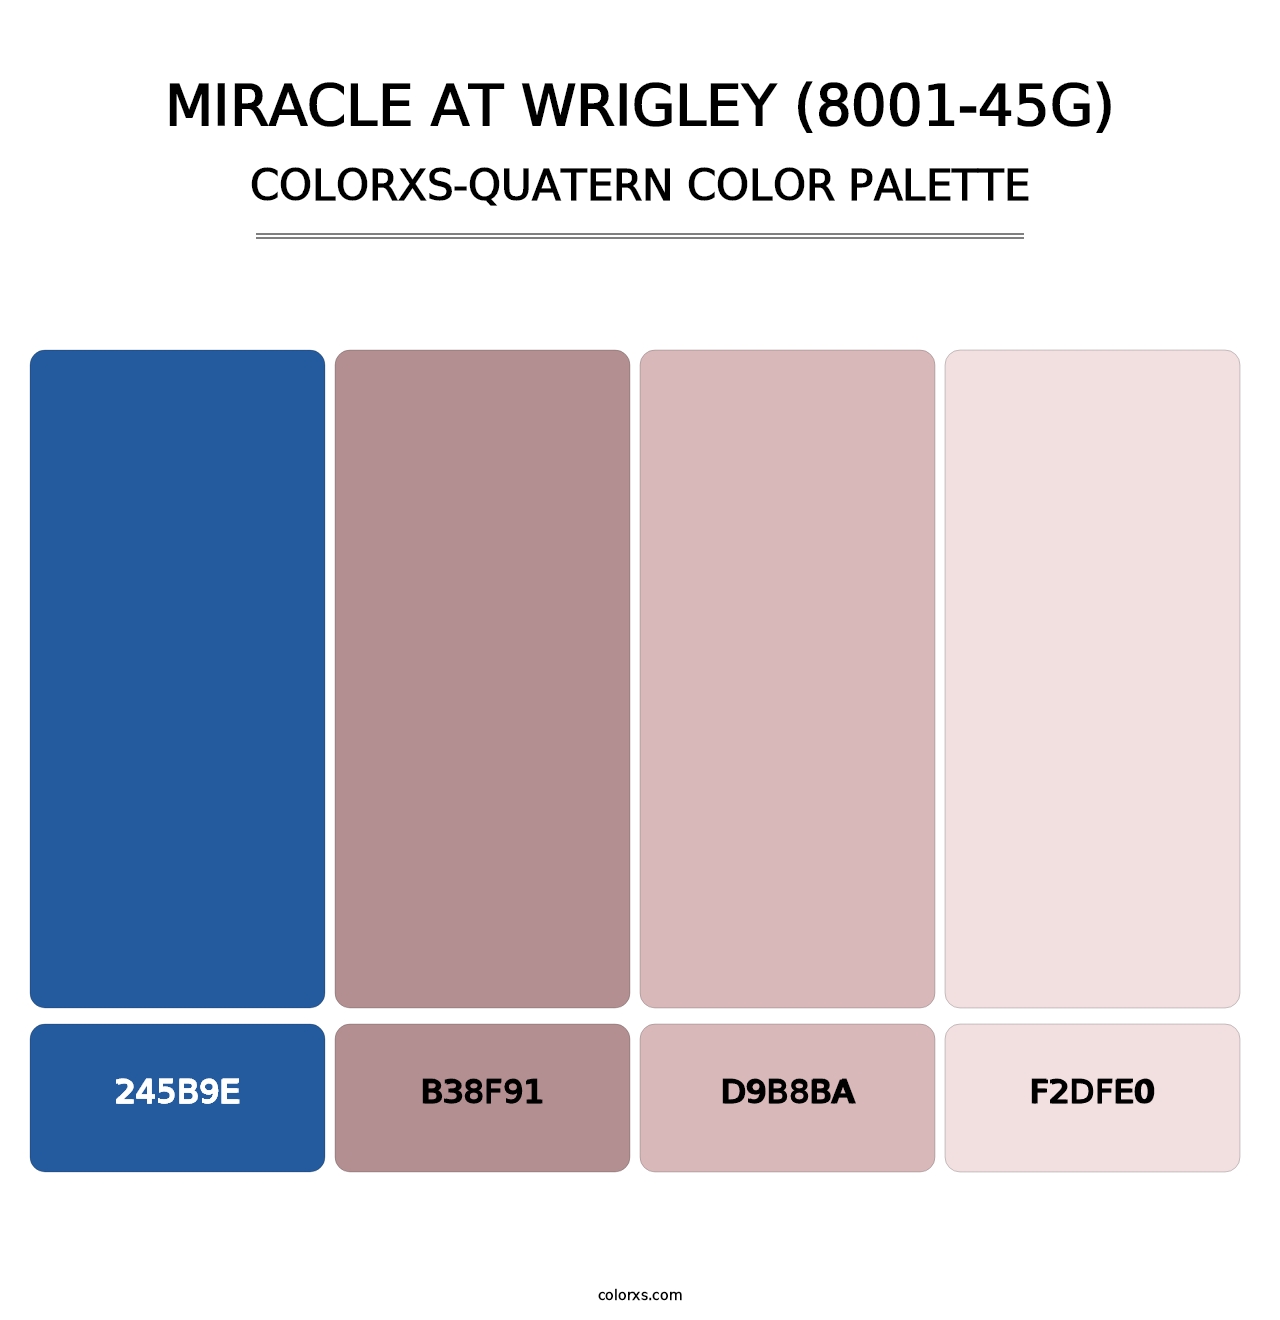 Miracle at Wrigley (8001-45G) - Colorxs Quatern Palette